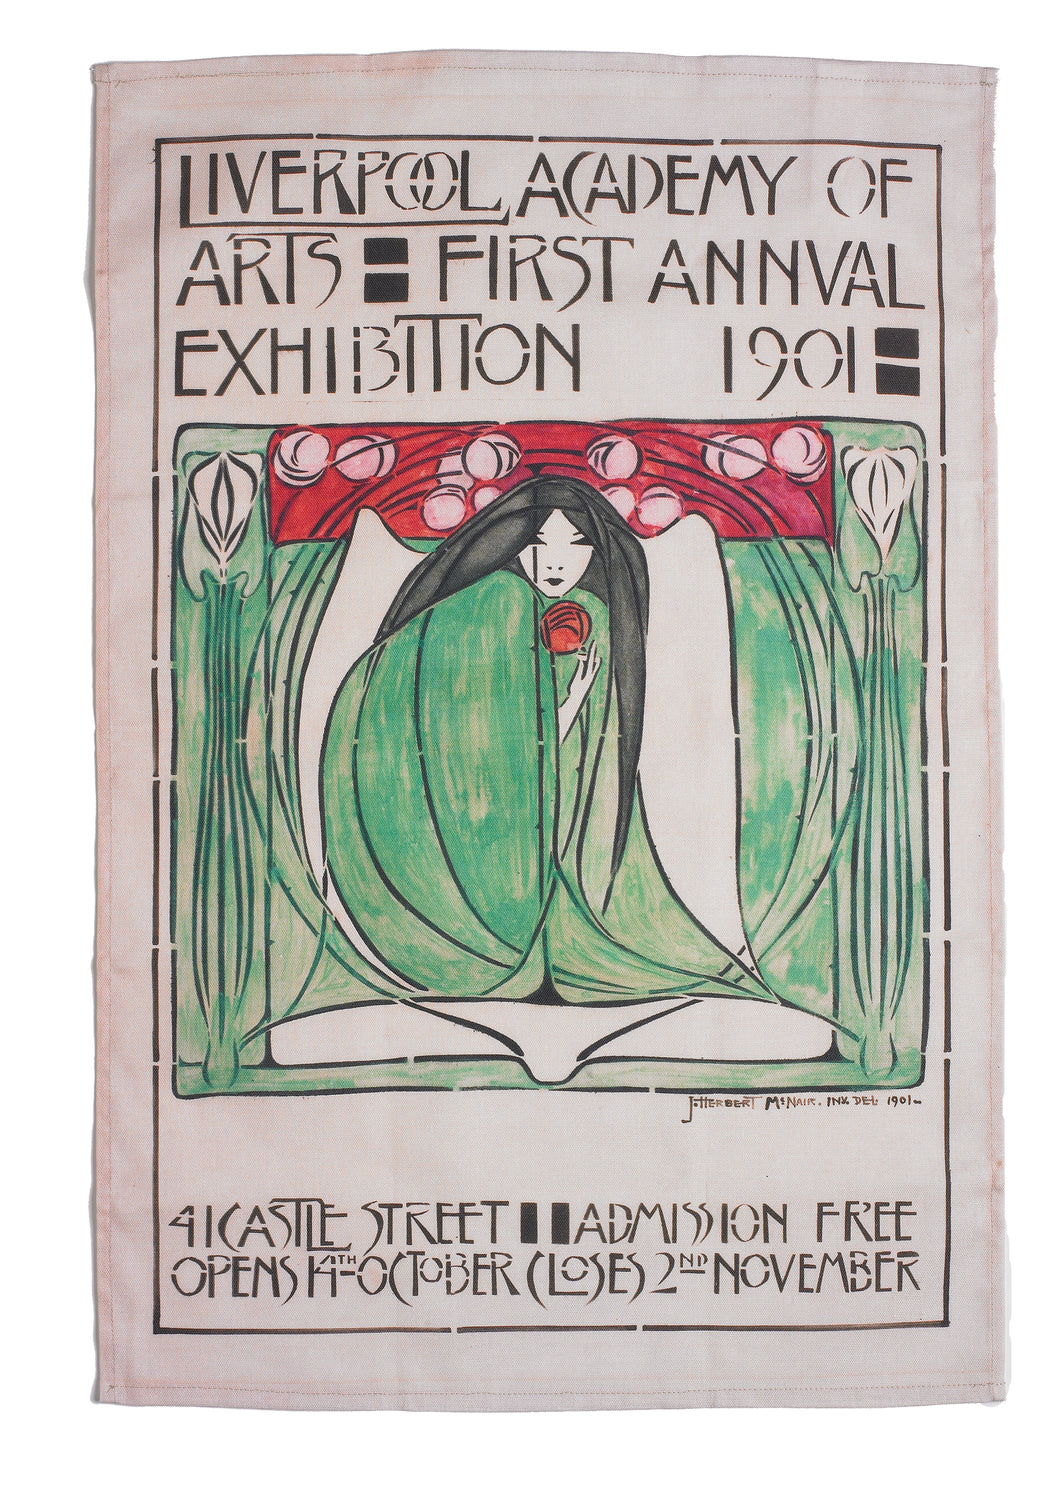 Rectangular tea towel showing a reproduction of a poster advertising a Liverpool Academy of Arts exhibition, featuring an illustration of a woman, crouched, dressed in a green and holding a red flower.